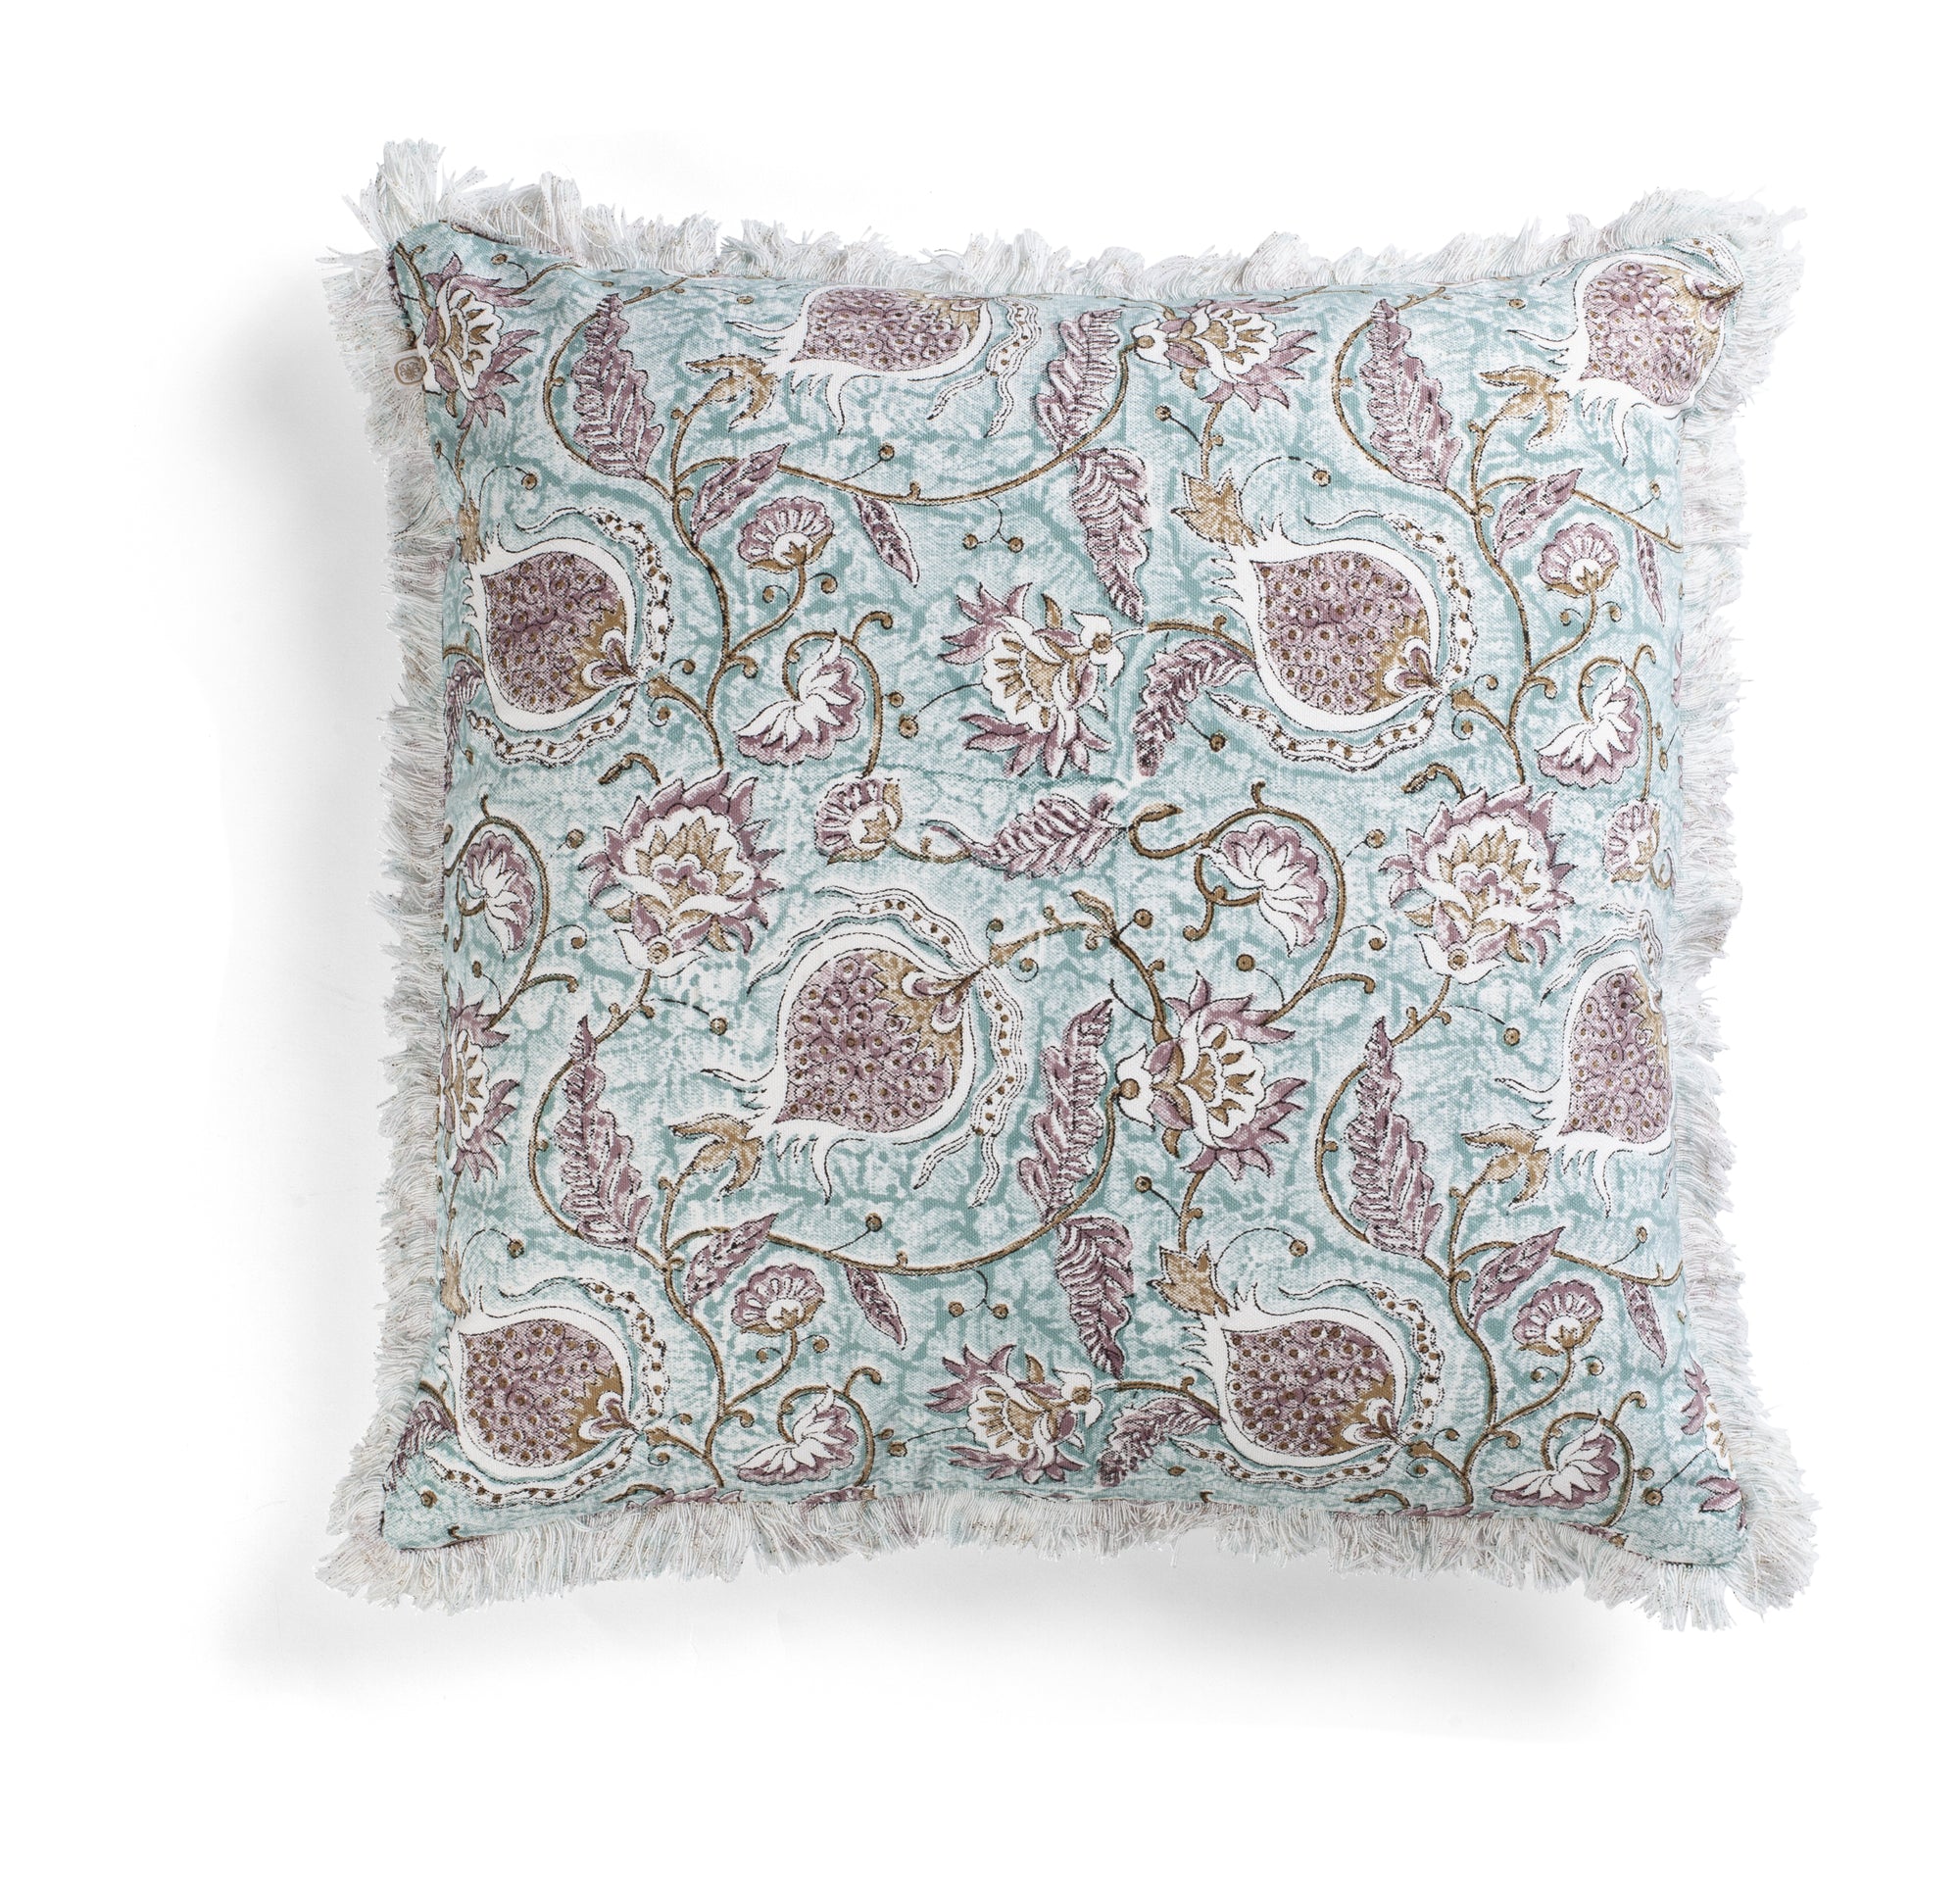 Cotton Cushion Cover Pomegranate Design with frayed edge - Turquoise